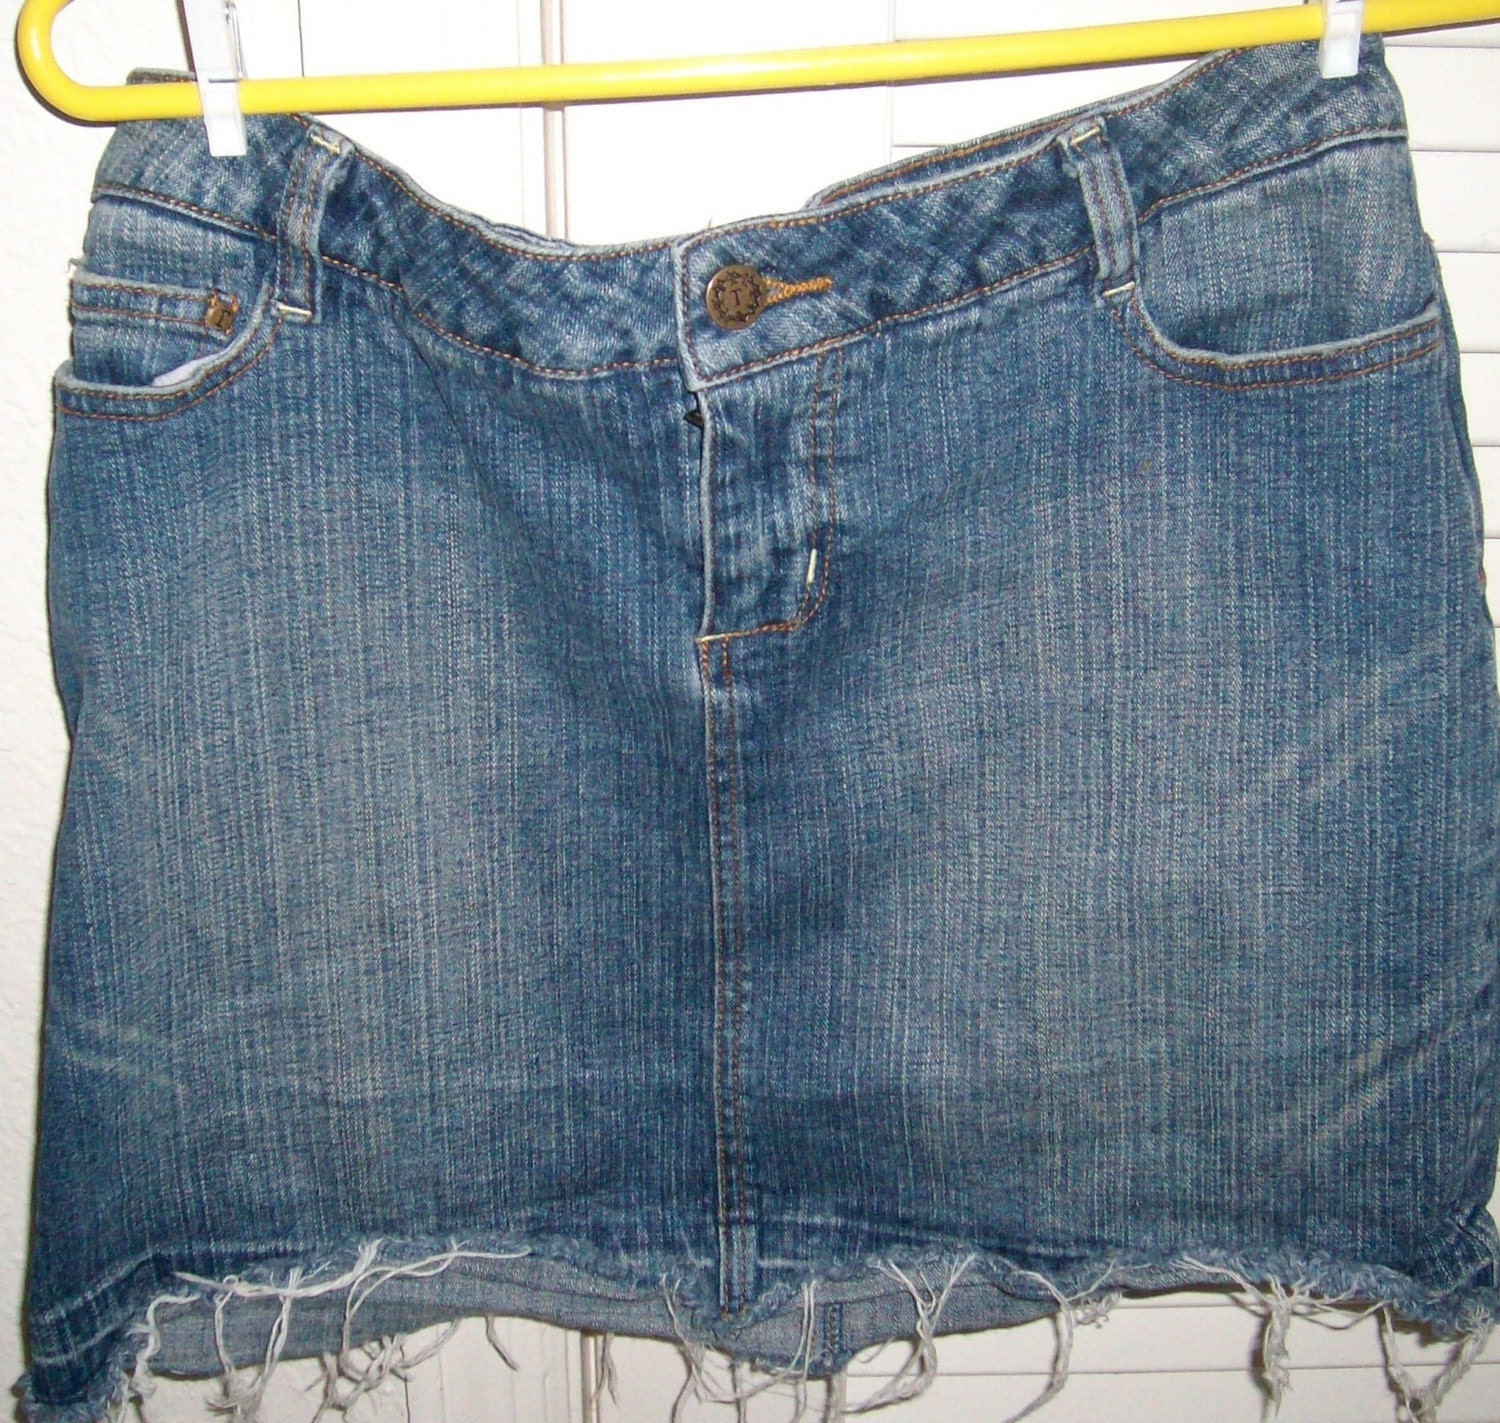 Jeans Skirts For Women